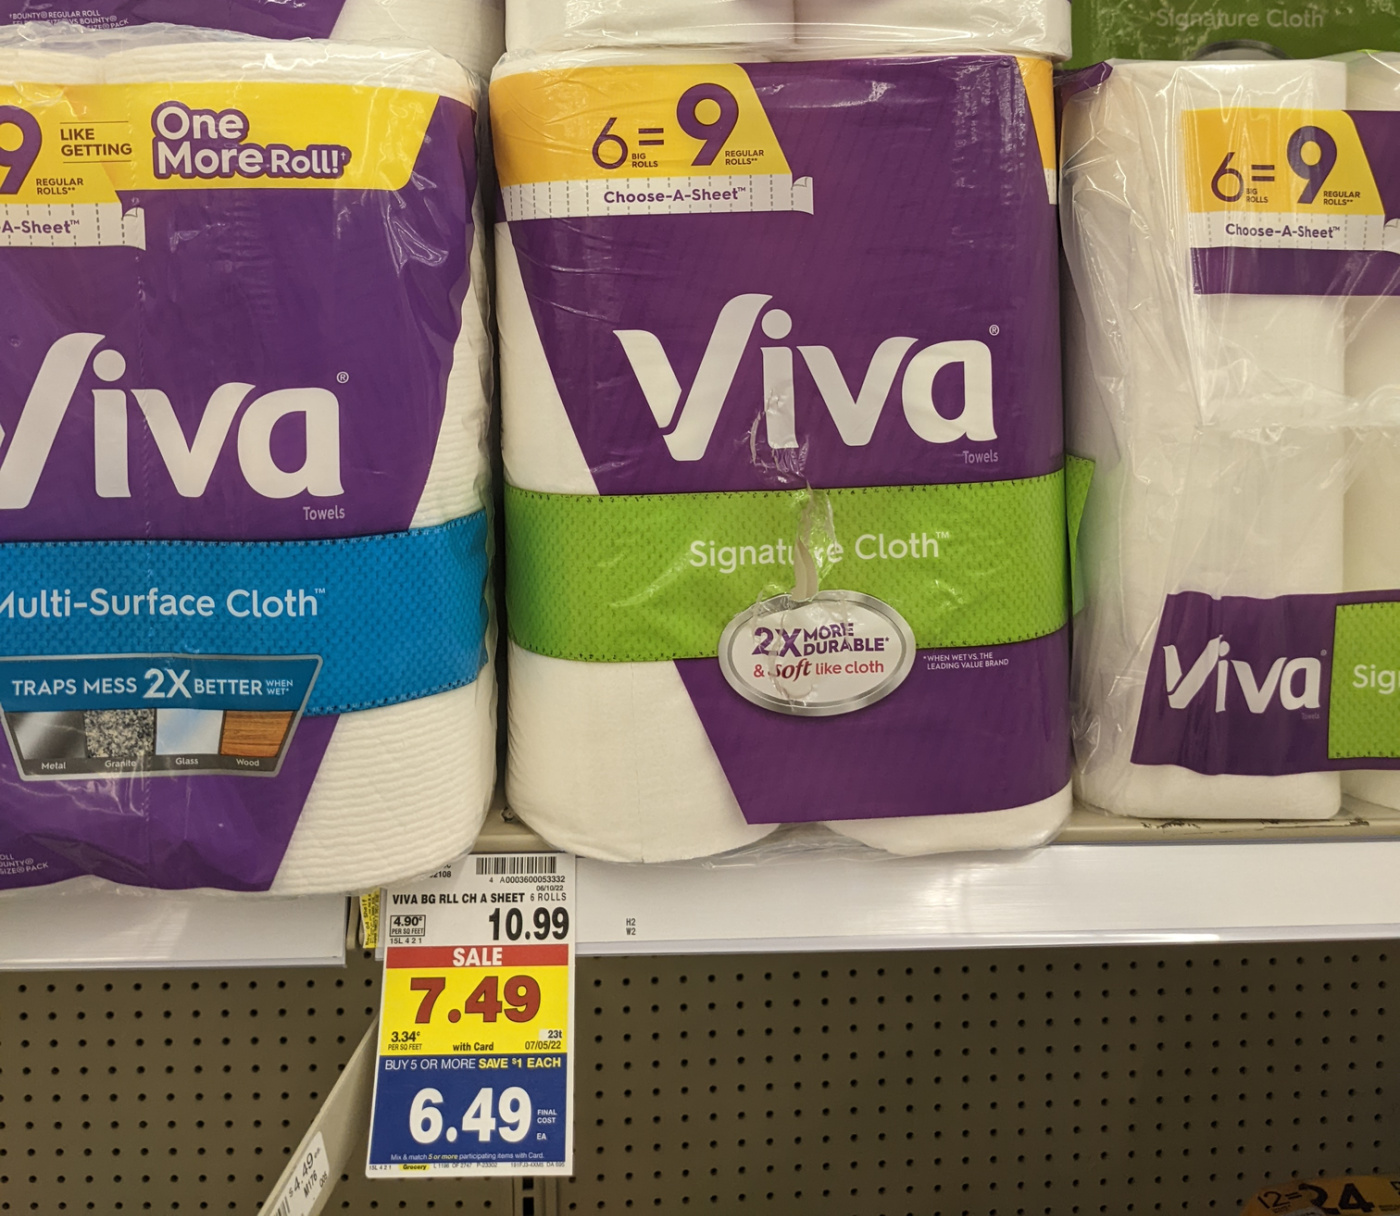 Where do I get cleaning rags? Save on paper towels, part 2